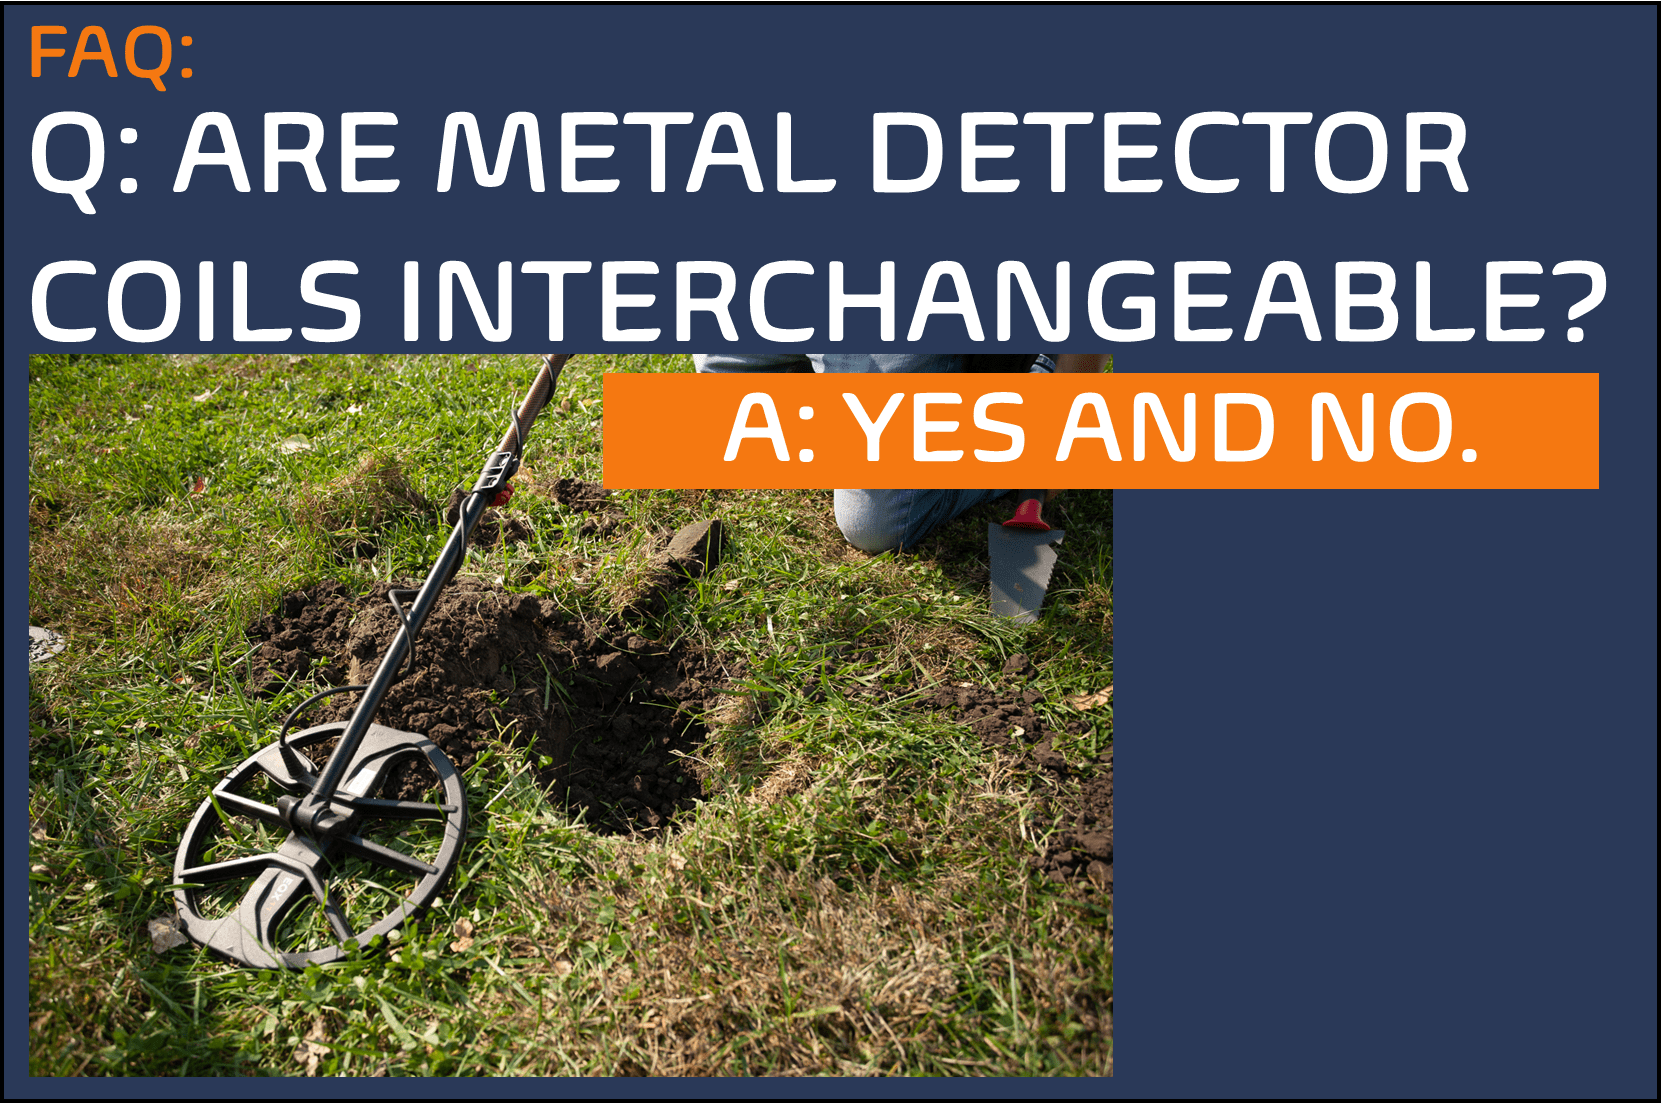 FAQ: Are metal detector search coils interchangeable?